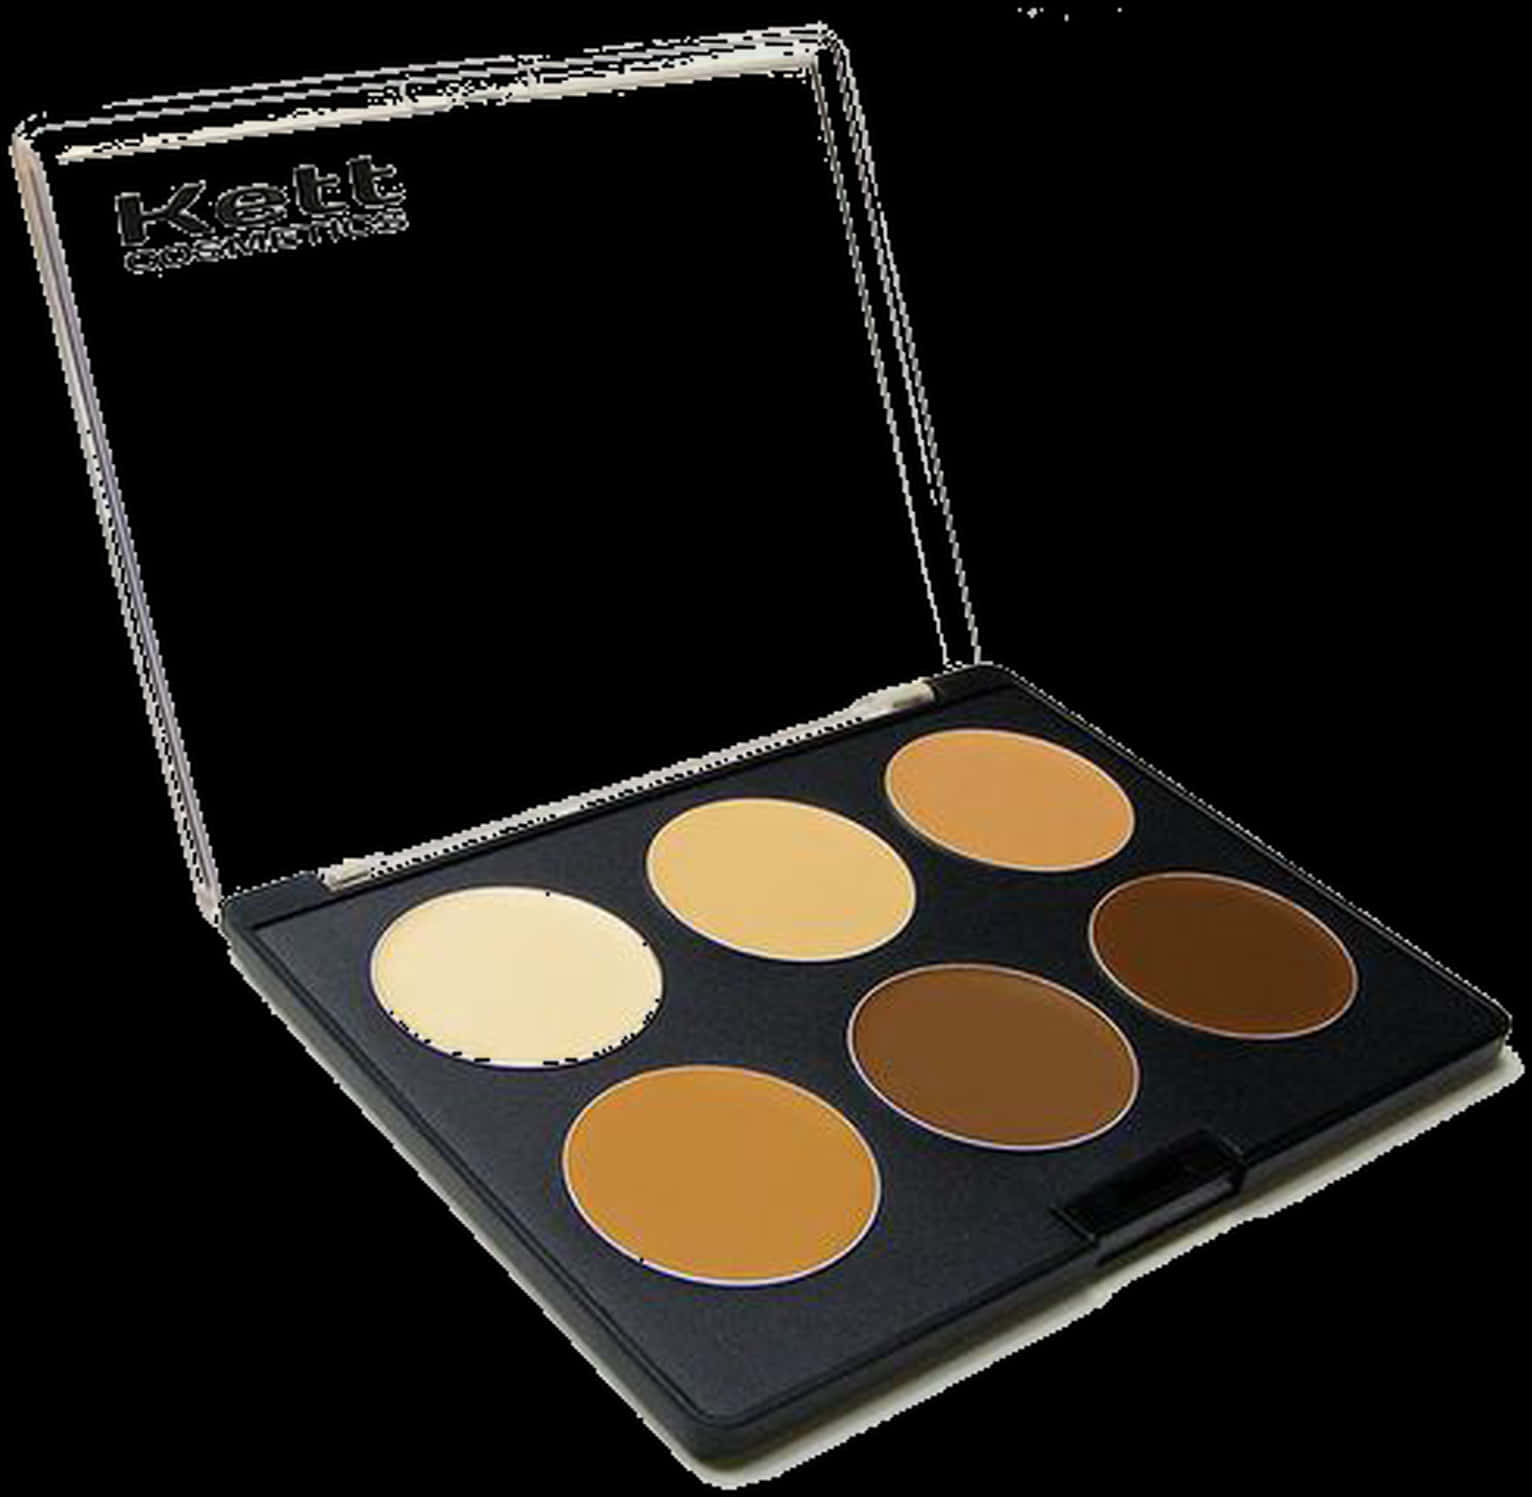 A Makeup Palette With Different Shades Of Brown And Tan